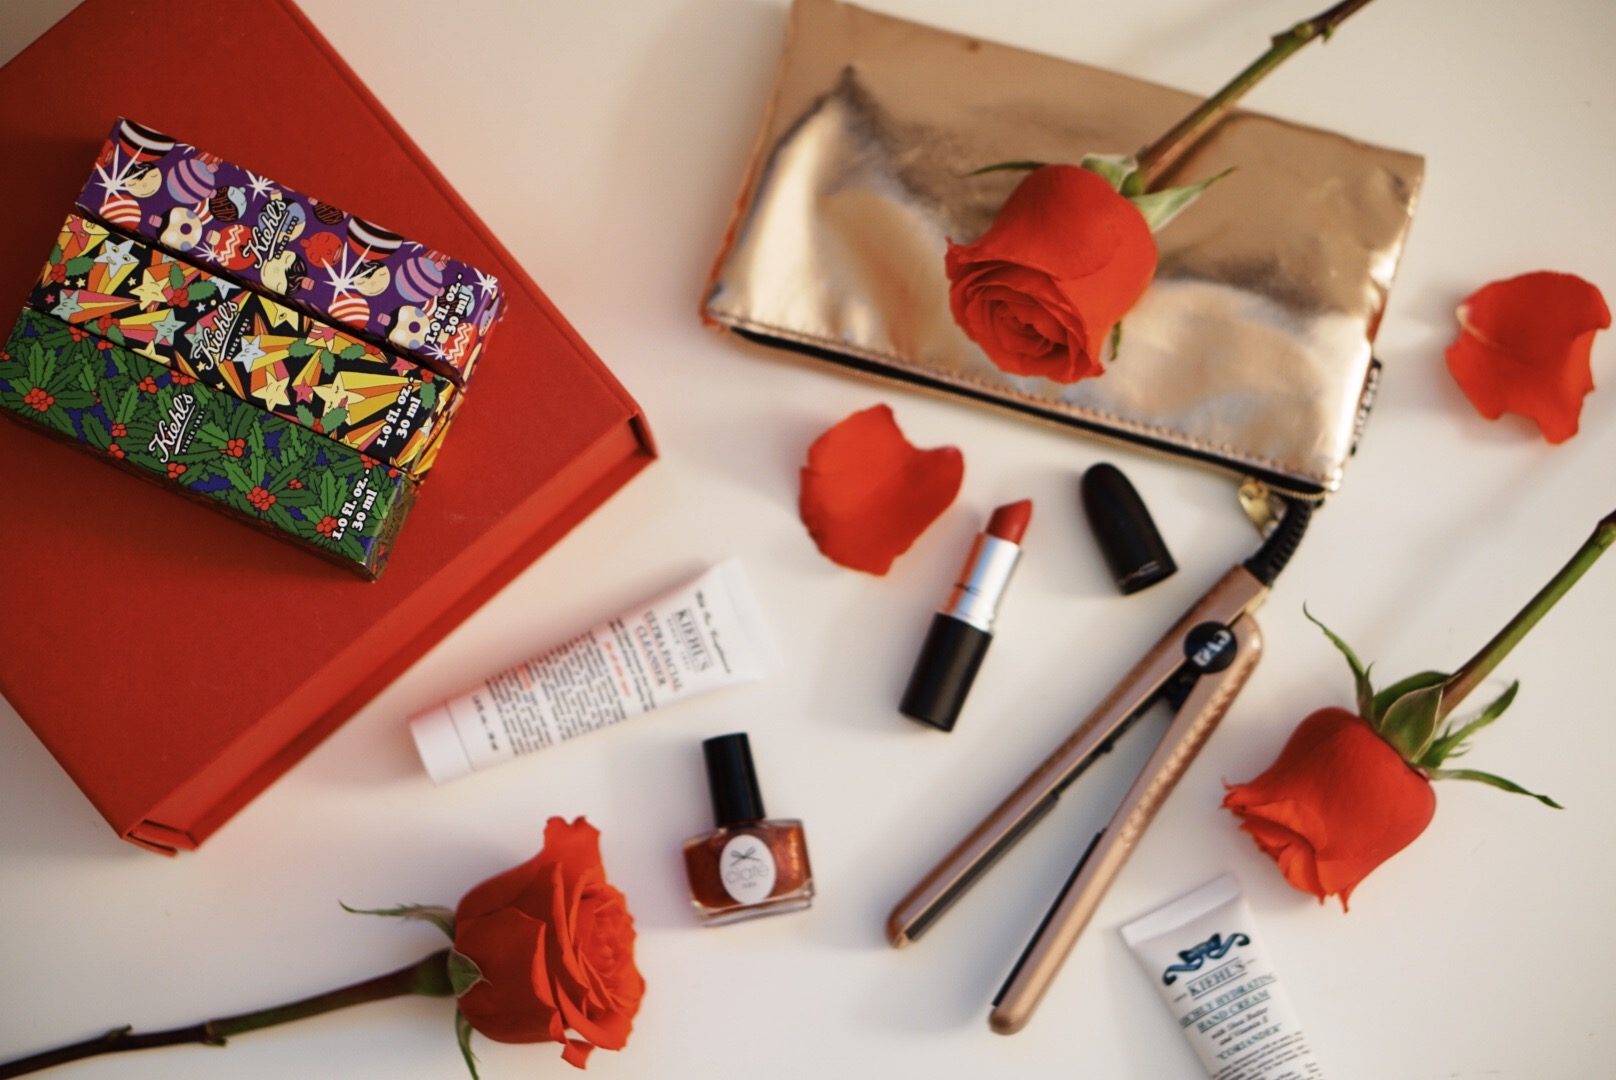 Arianna of Blake and Gold shares her winter beauty essentials featuring Kiehls